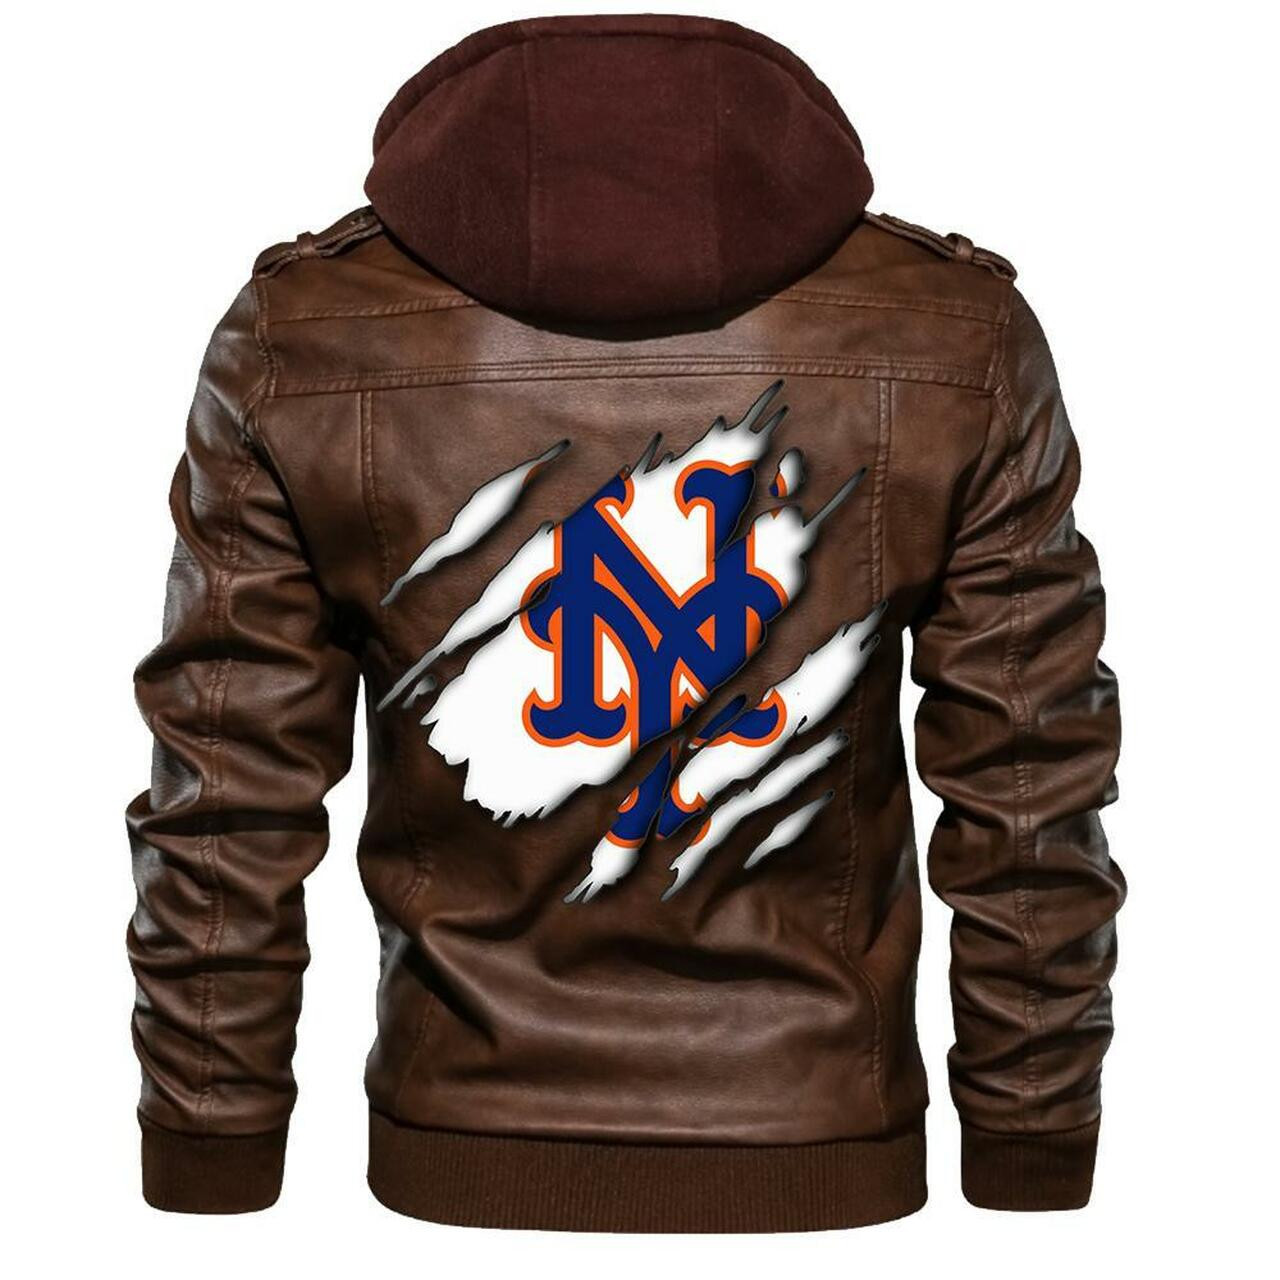 Top leather jacket can keep you warm on cooler days 217